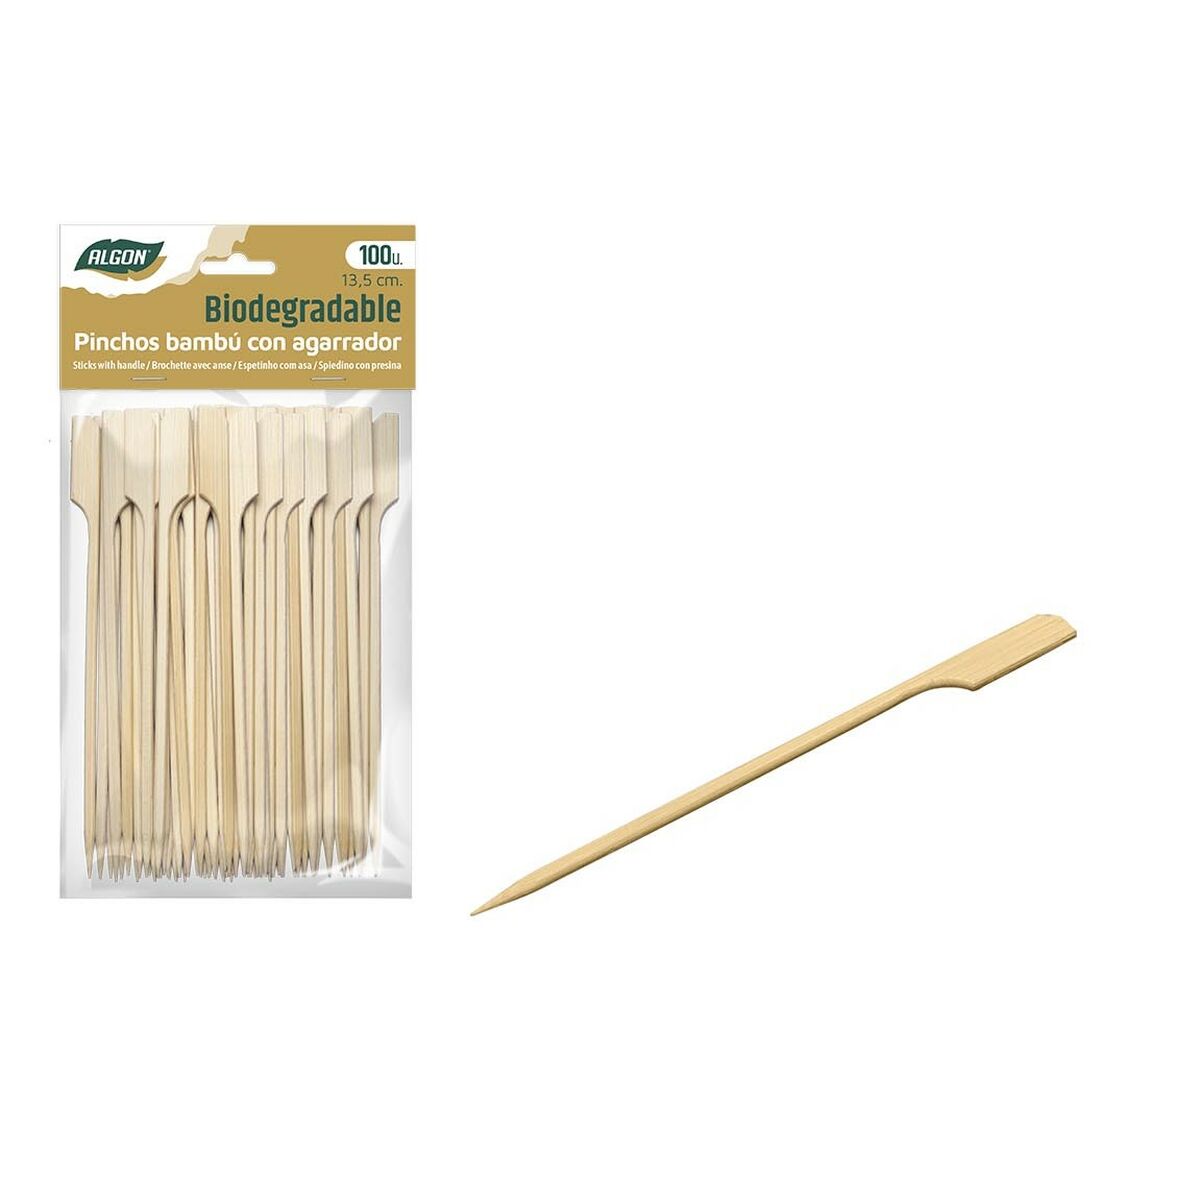 Barbecue Skewer Set Algon Bamboo 100 Pieces 13,5 cm (18 Units)